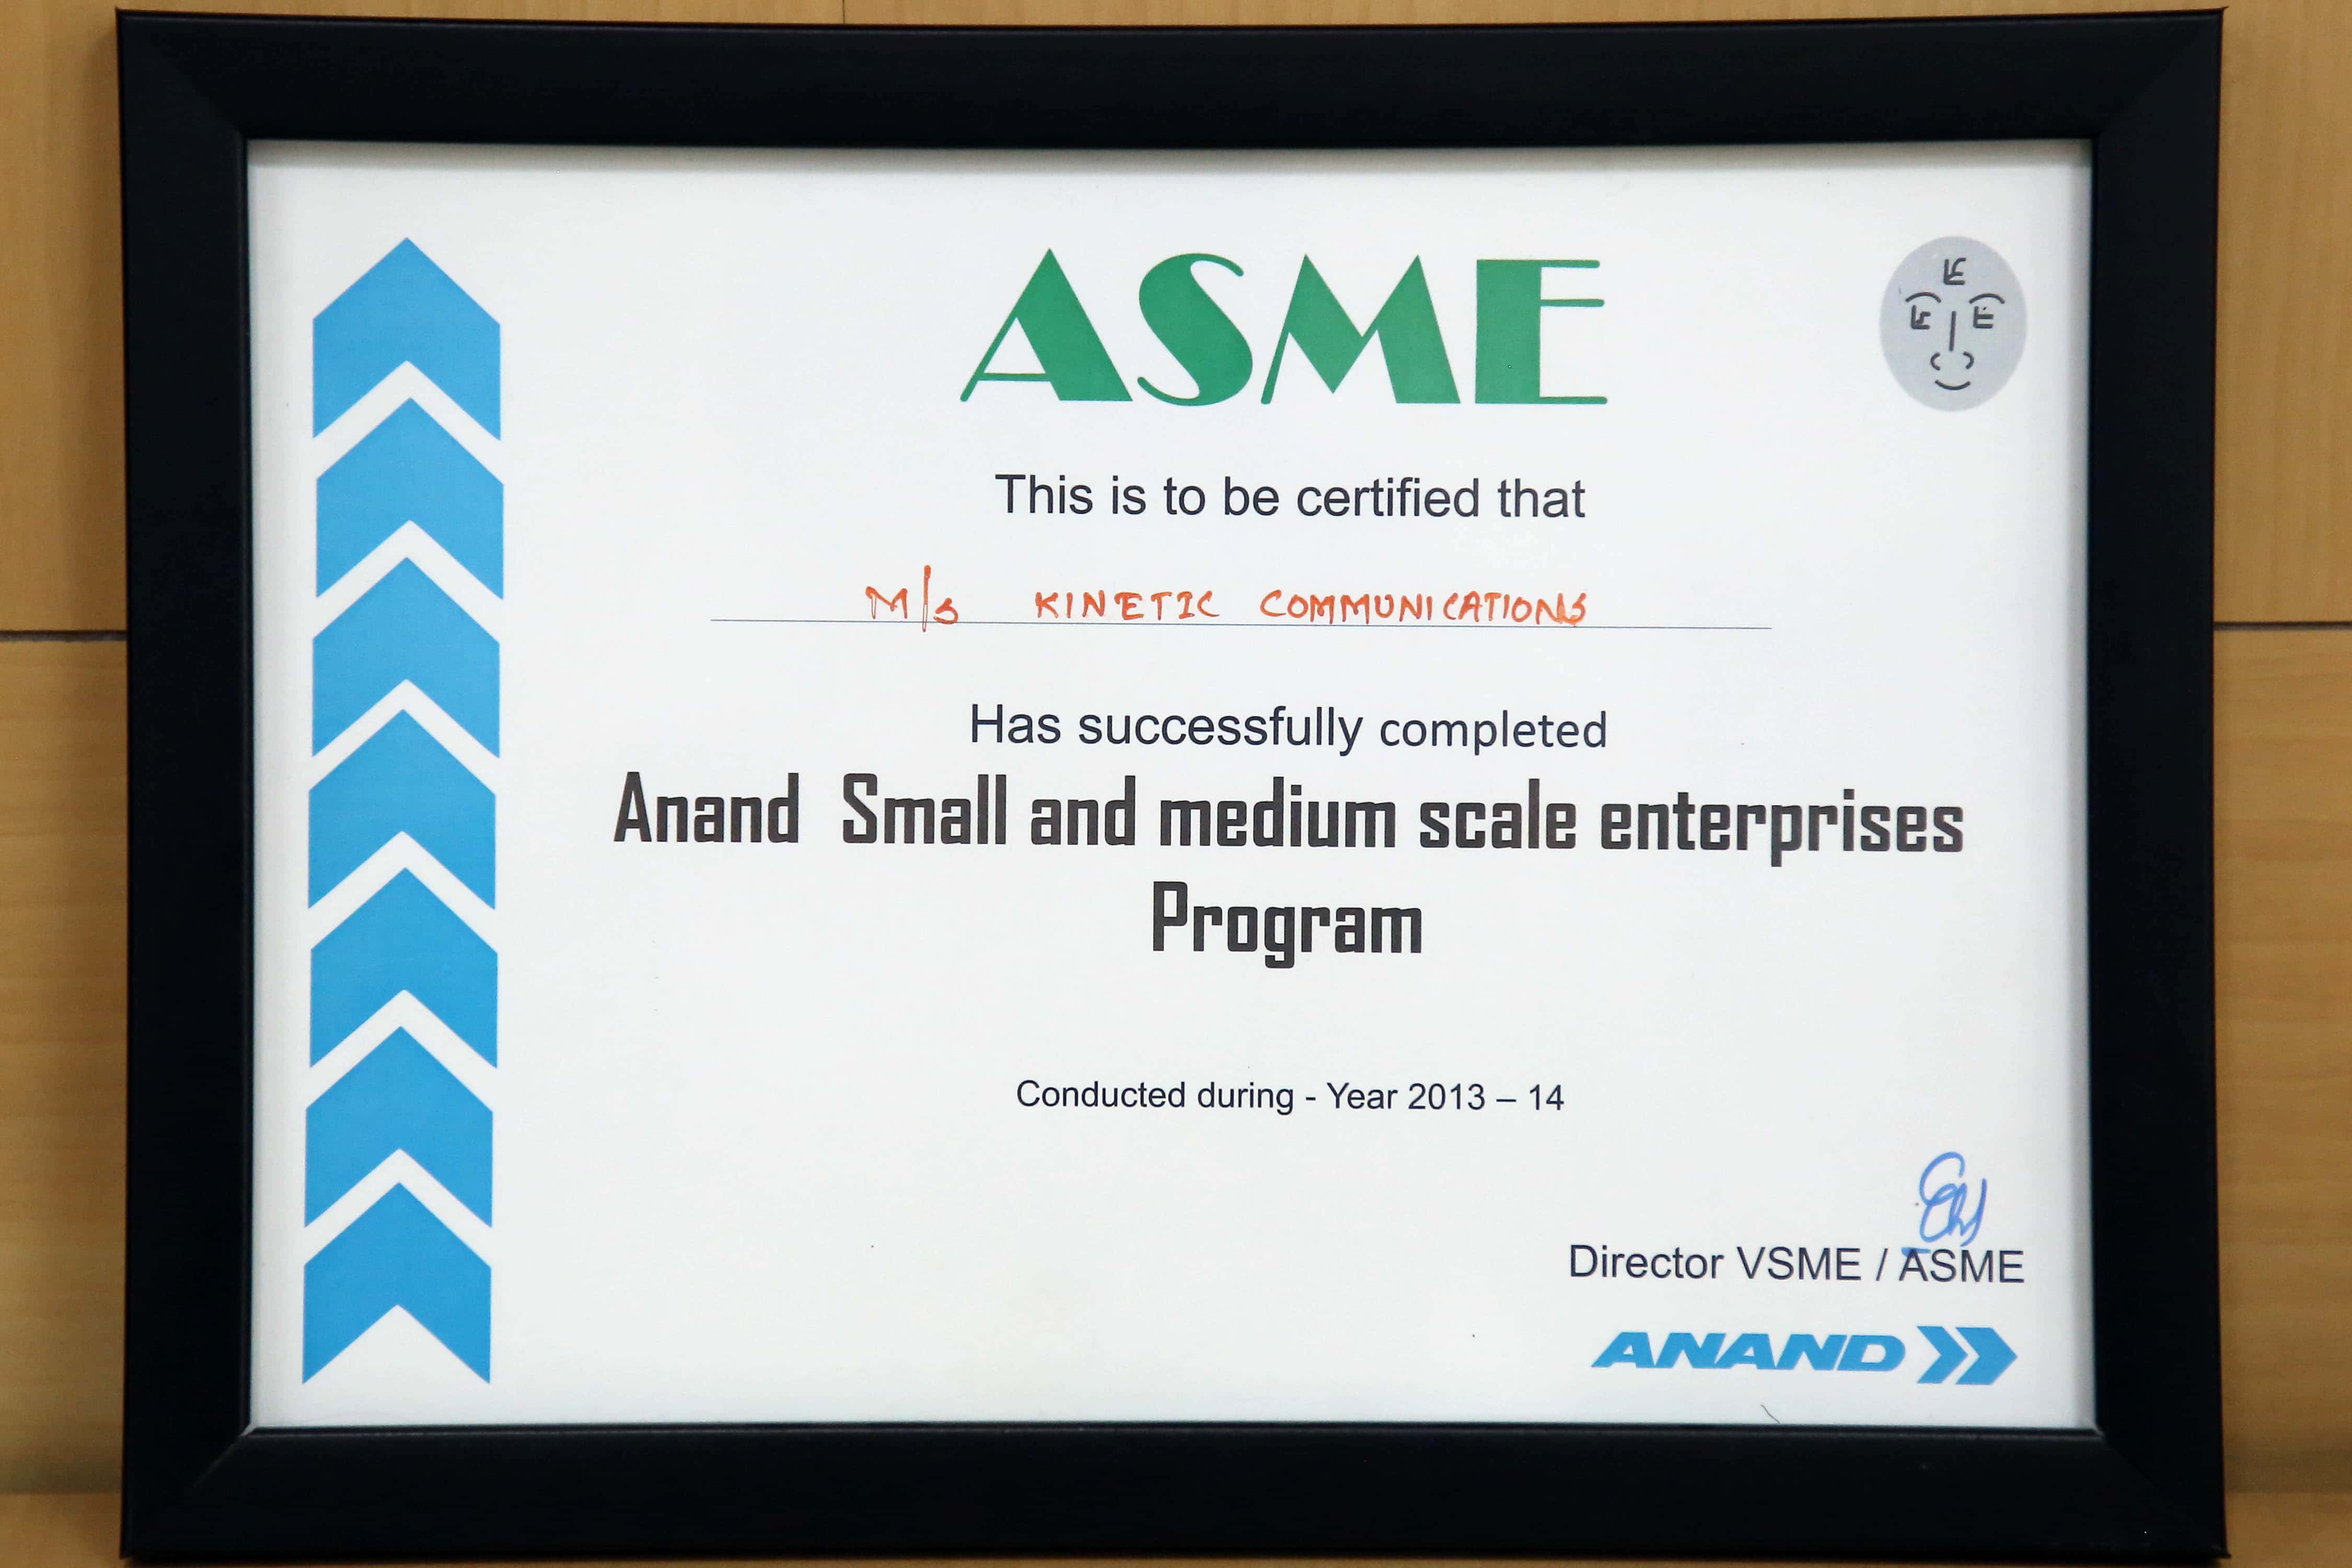 Anand Small and Medium Scale Enterprises Program